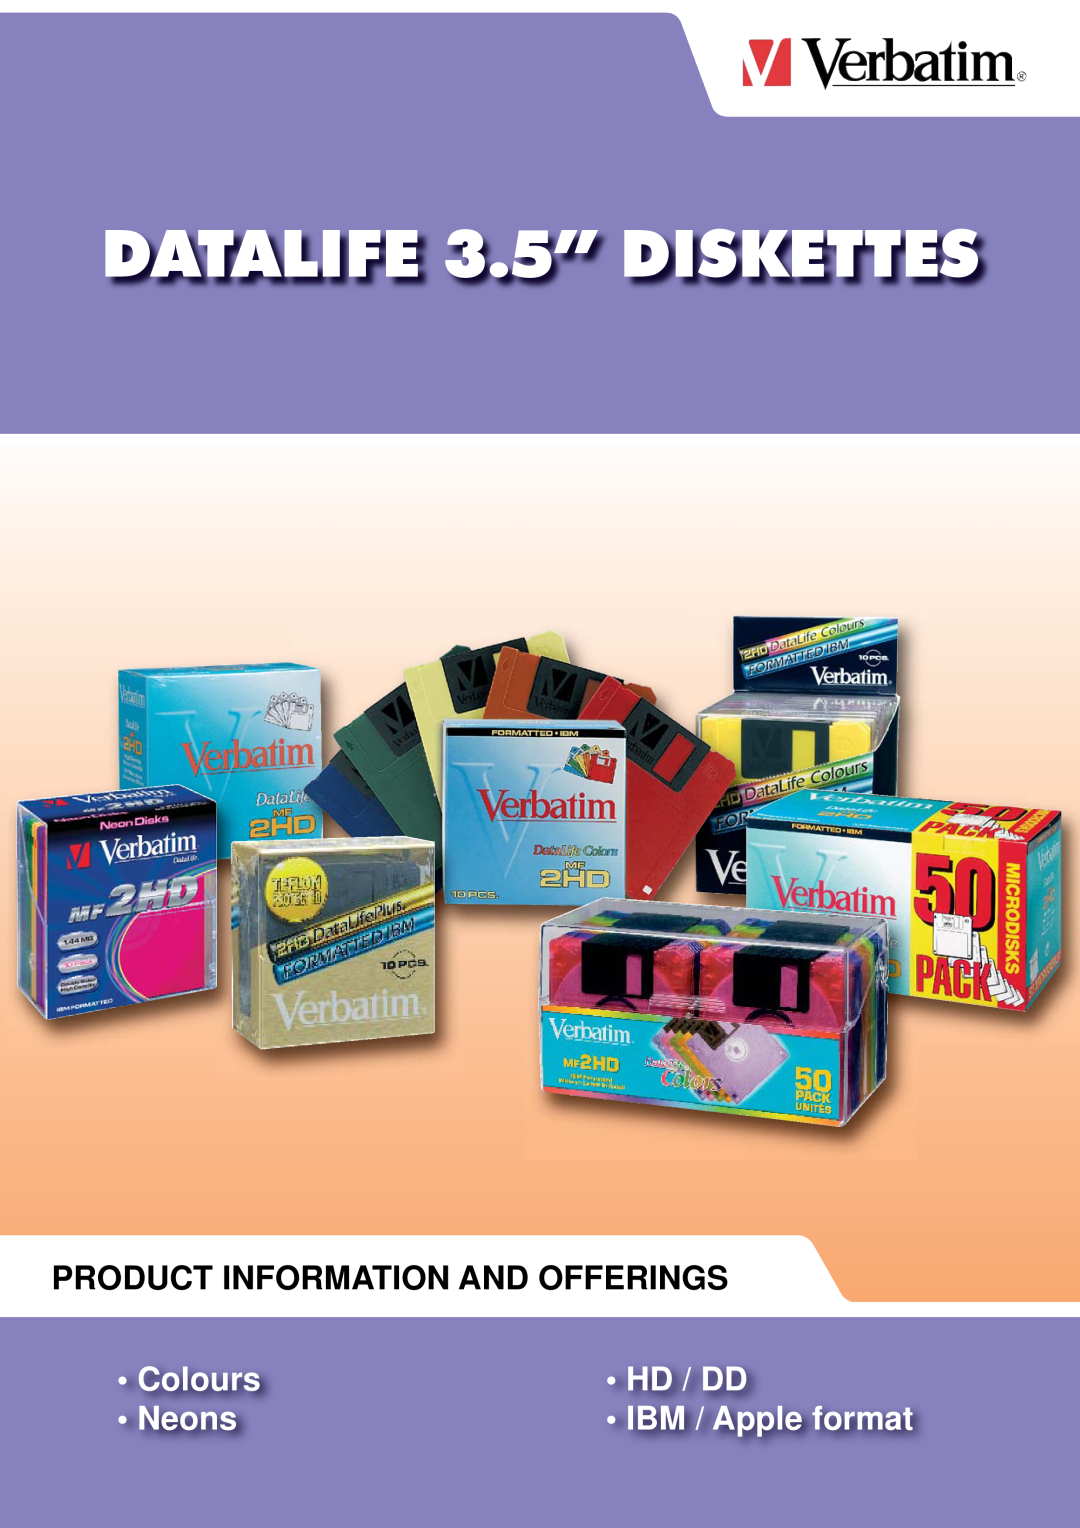 Verbatim Datalife 3.5" Diskette manual DATALIFE 3.5” DISKETTES, Product Information And Offerings, Colours, Hd / Dd, Neons 